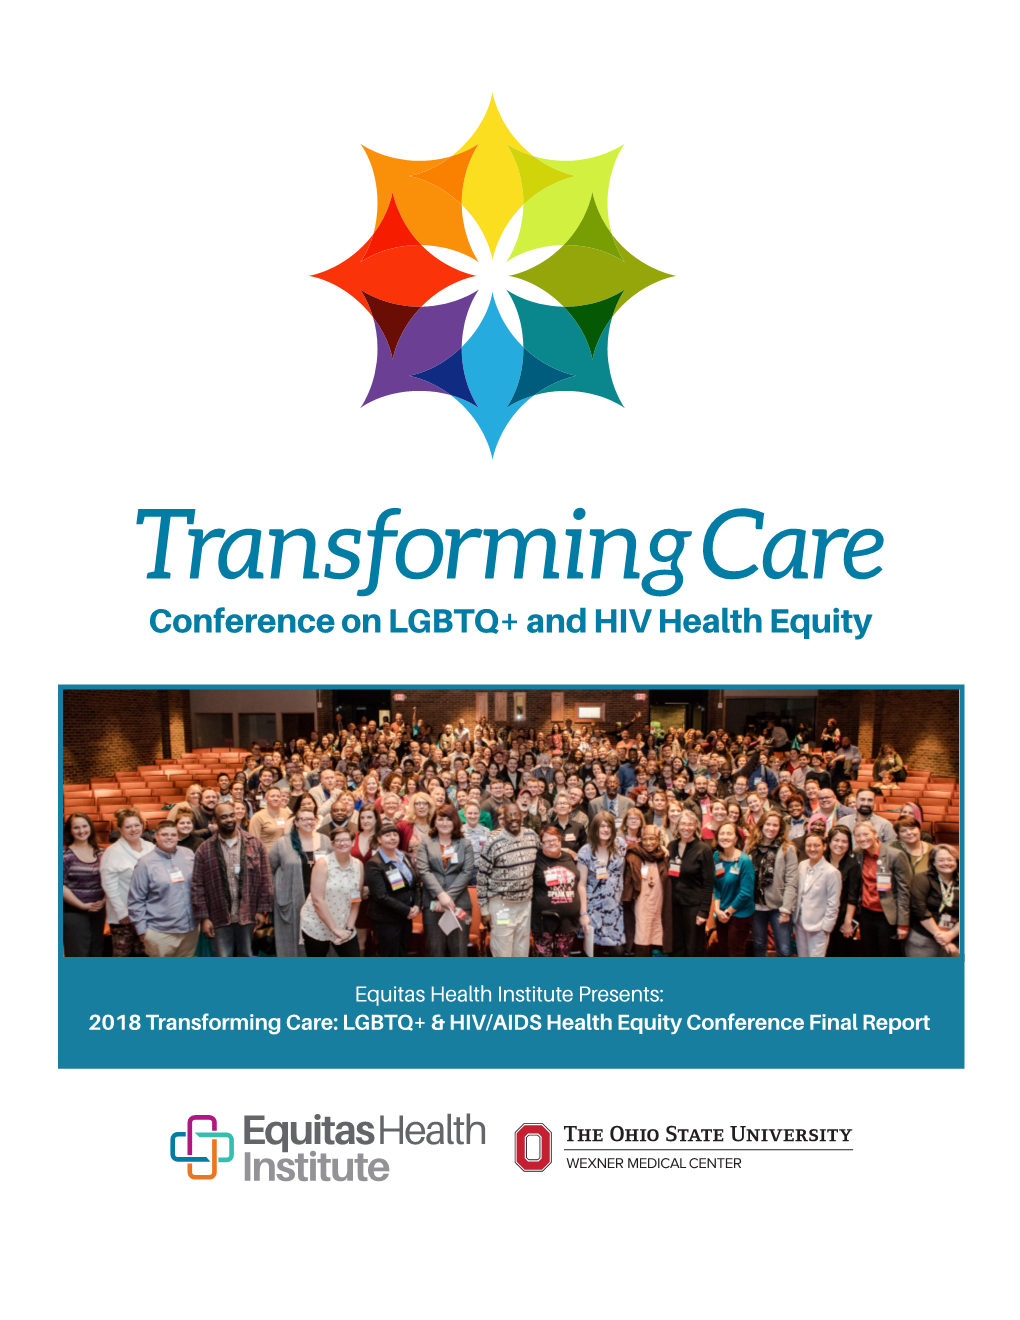 Conference on LGBTQ+ and HIV Health Equity